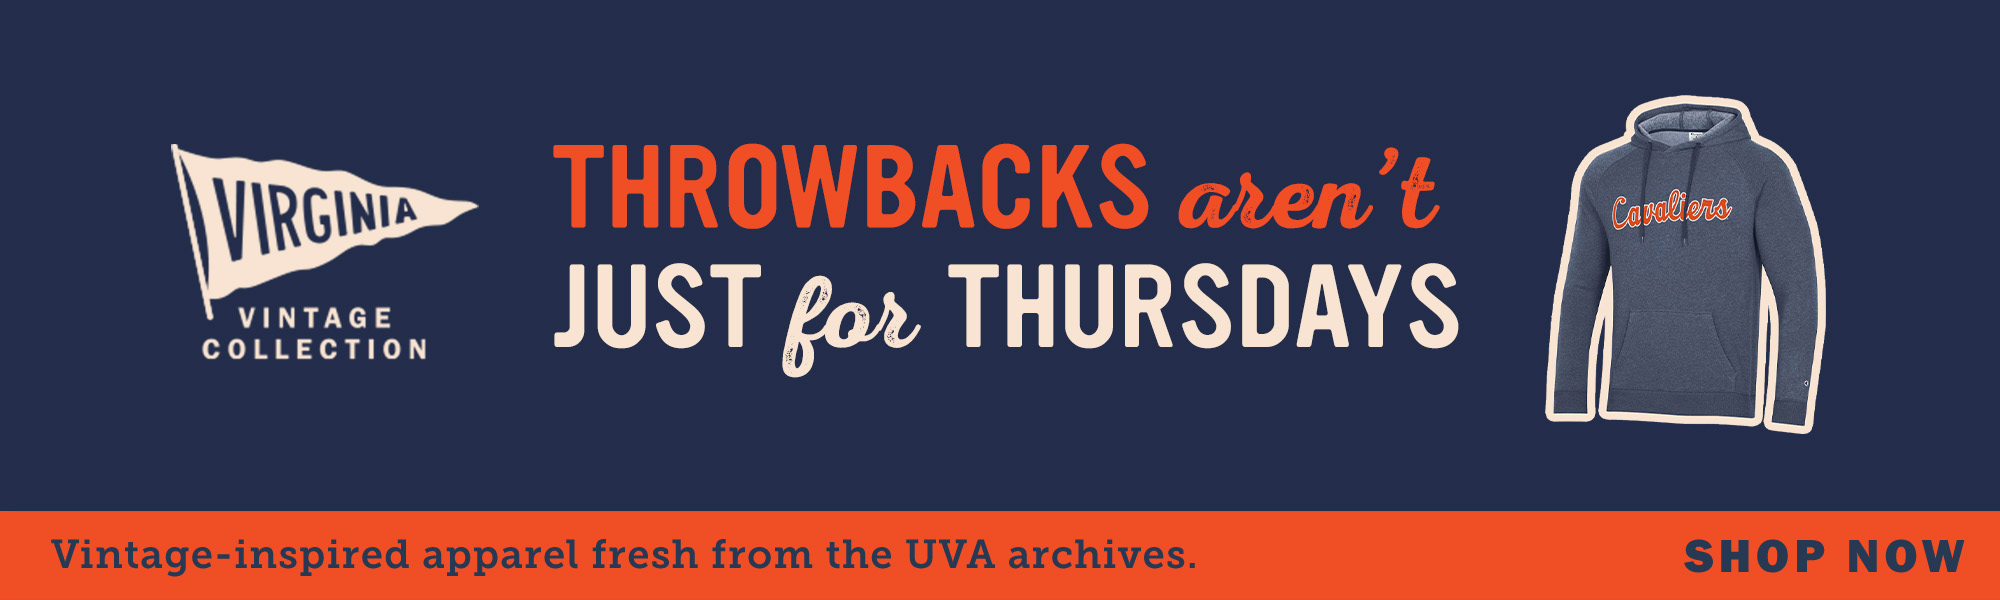 Throwbacks aren't just for Thursdays. Shop now for vintage-inspired apparel fresh from the UVA archives.